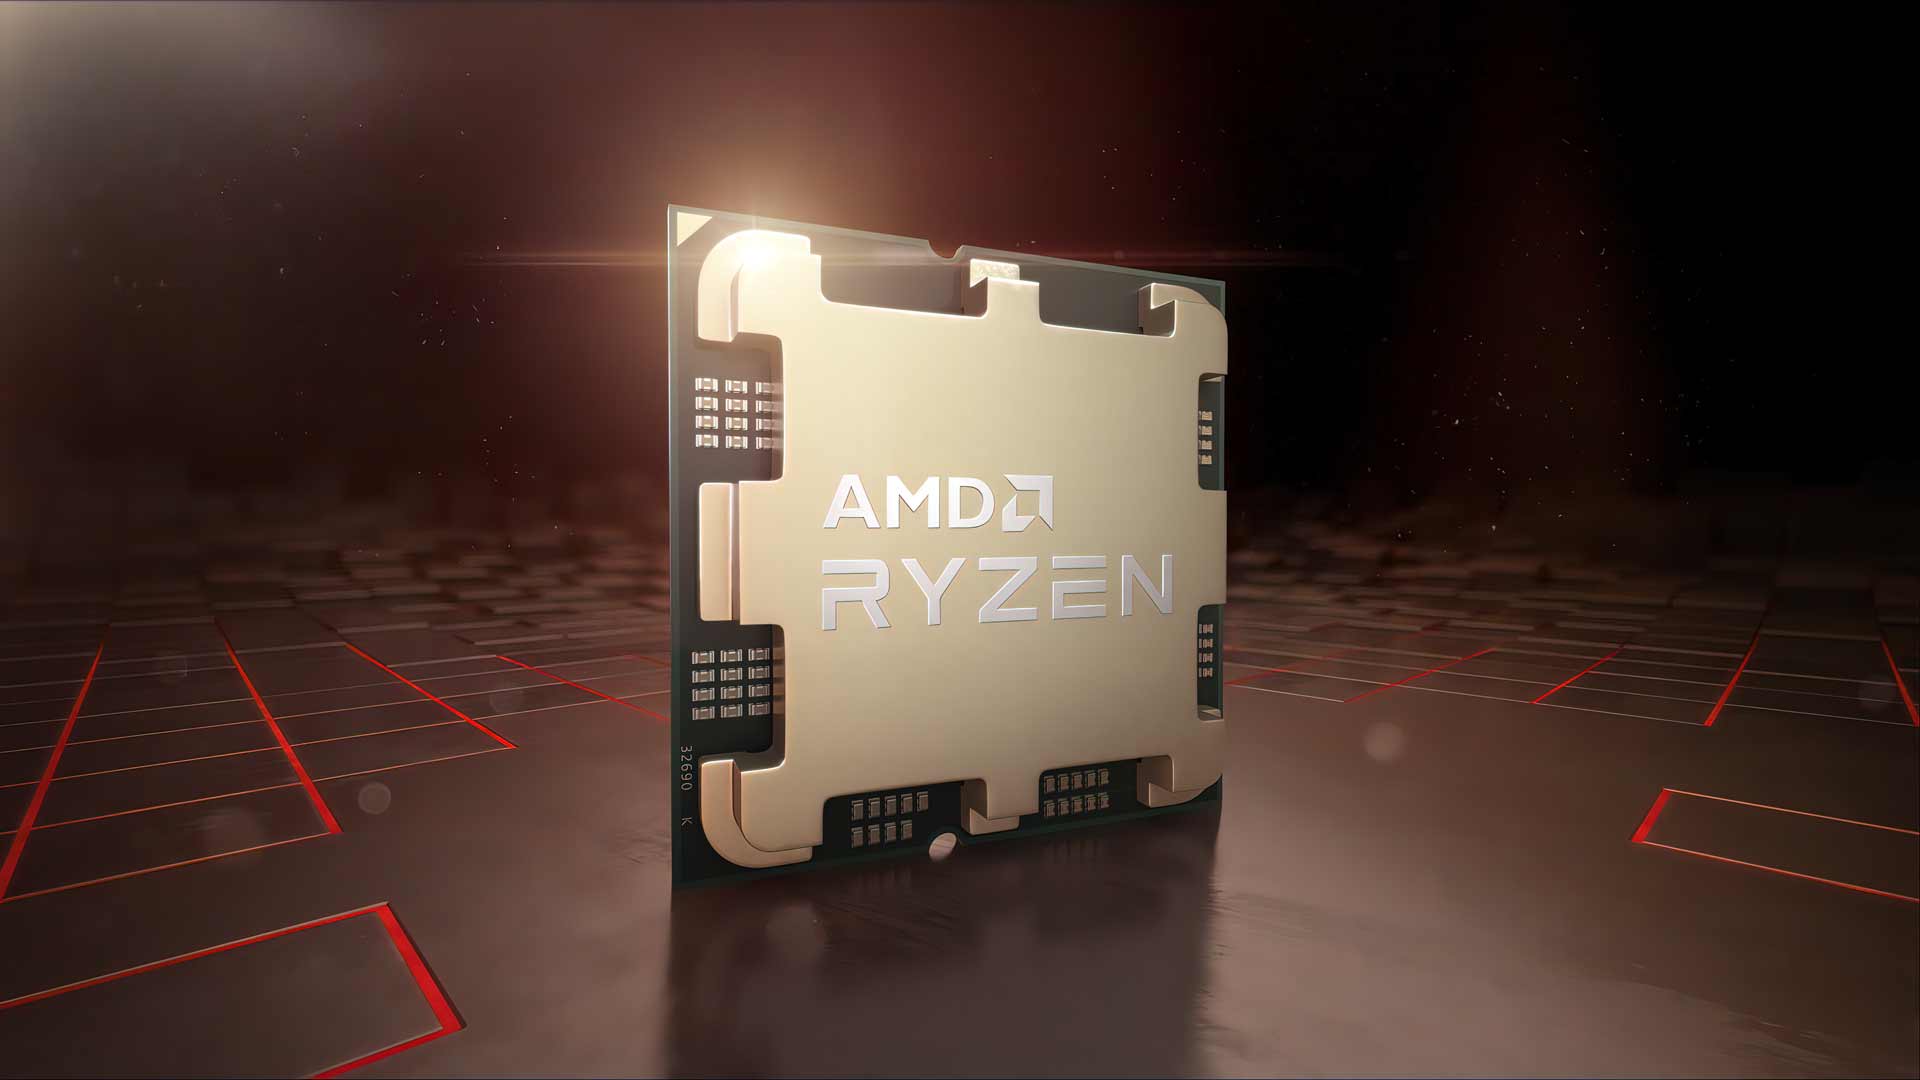 Amd Ryzen 7000 Series Cpu Performance Gaming Price Specs event motherboards